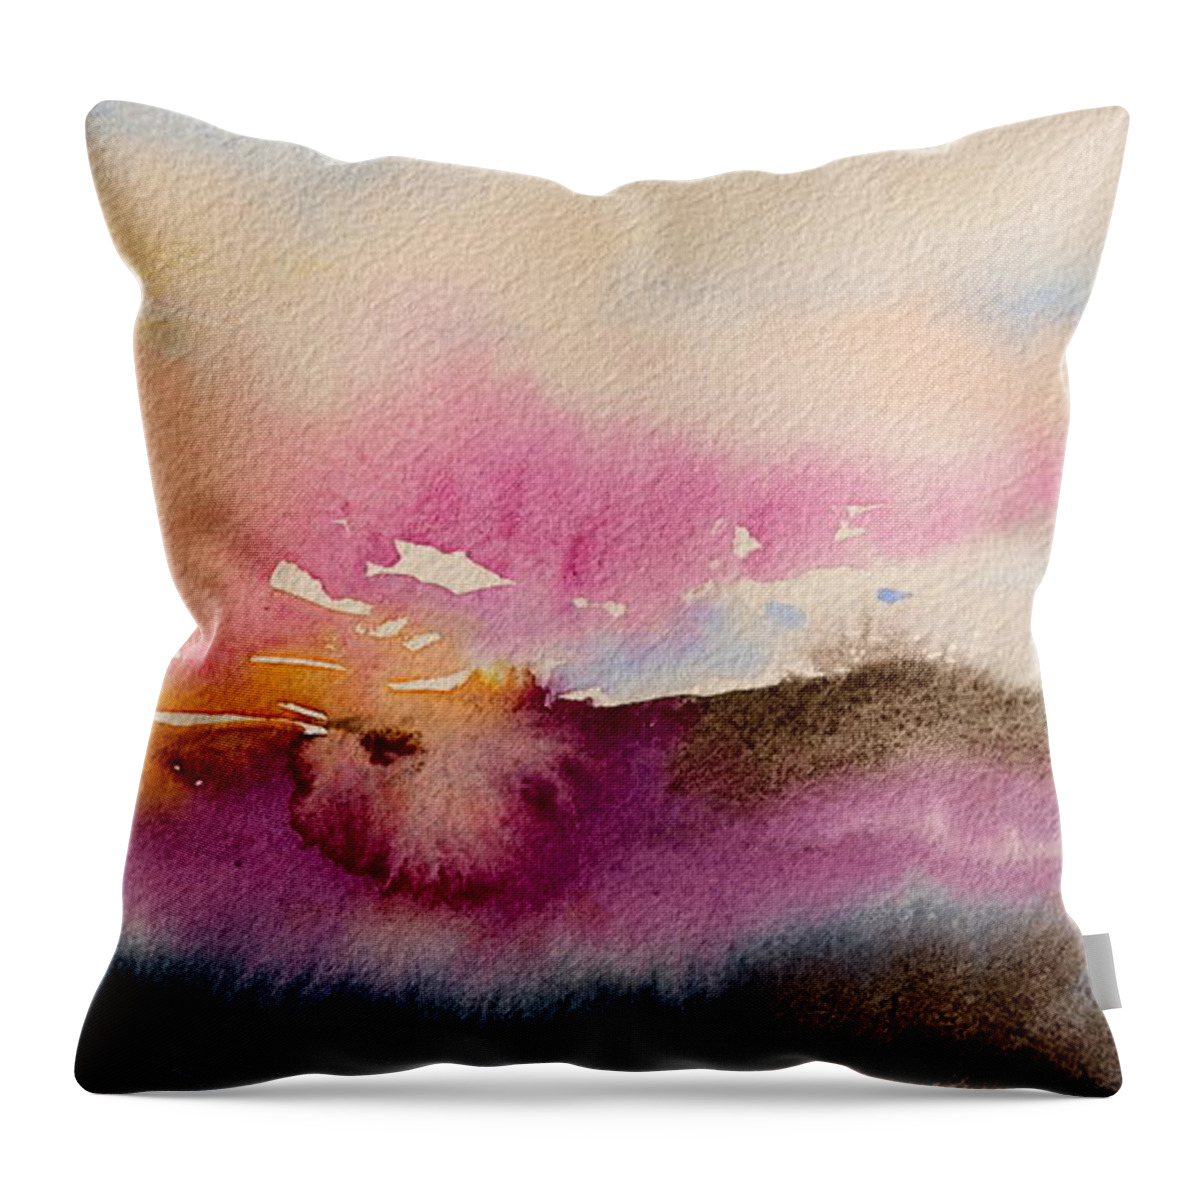 Purple Throw Pillow featuring the painting Into The Mist II by Beverley Harper Tinsley